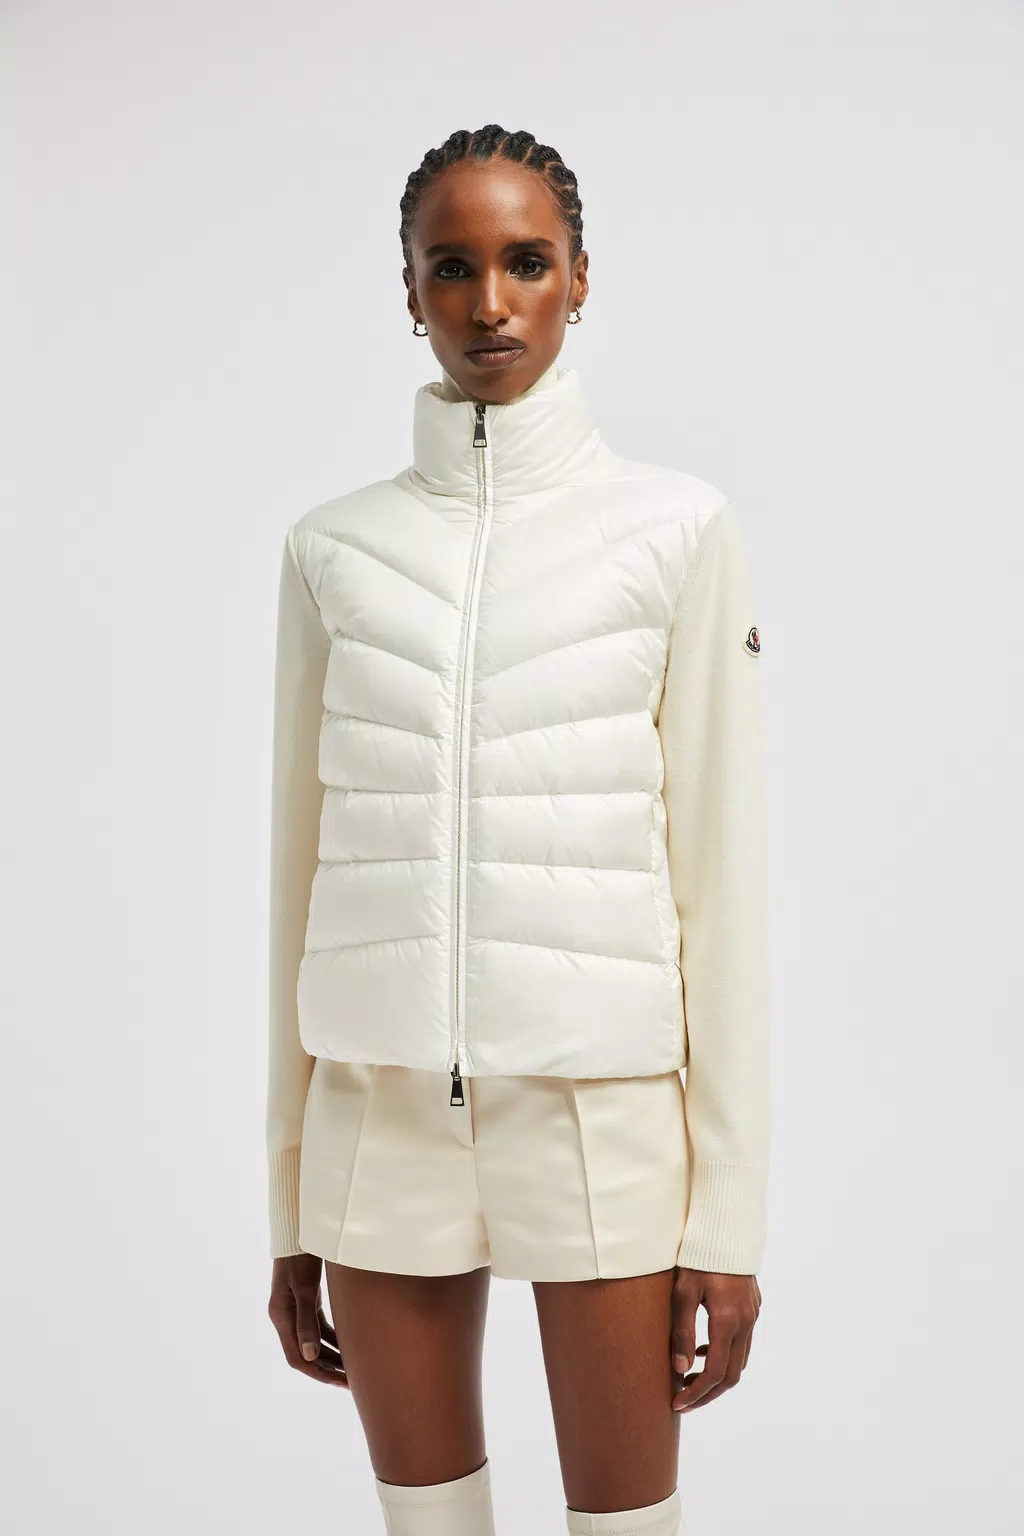 Jumpers, Hoodies & Cardigans for Women | Moncler UK